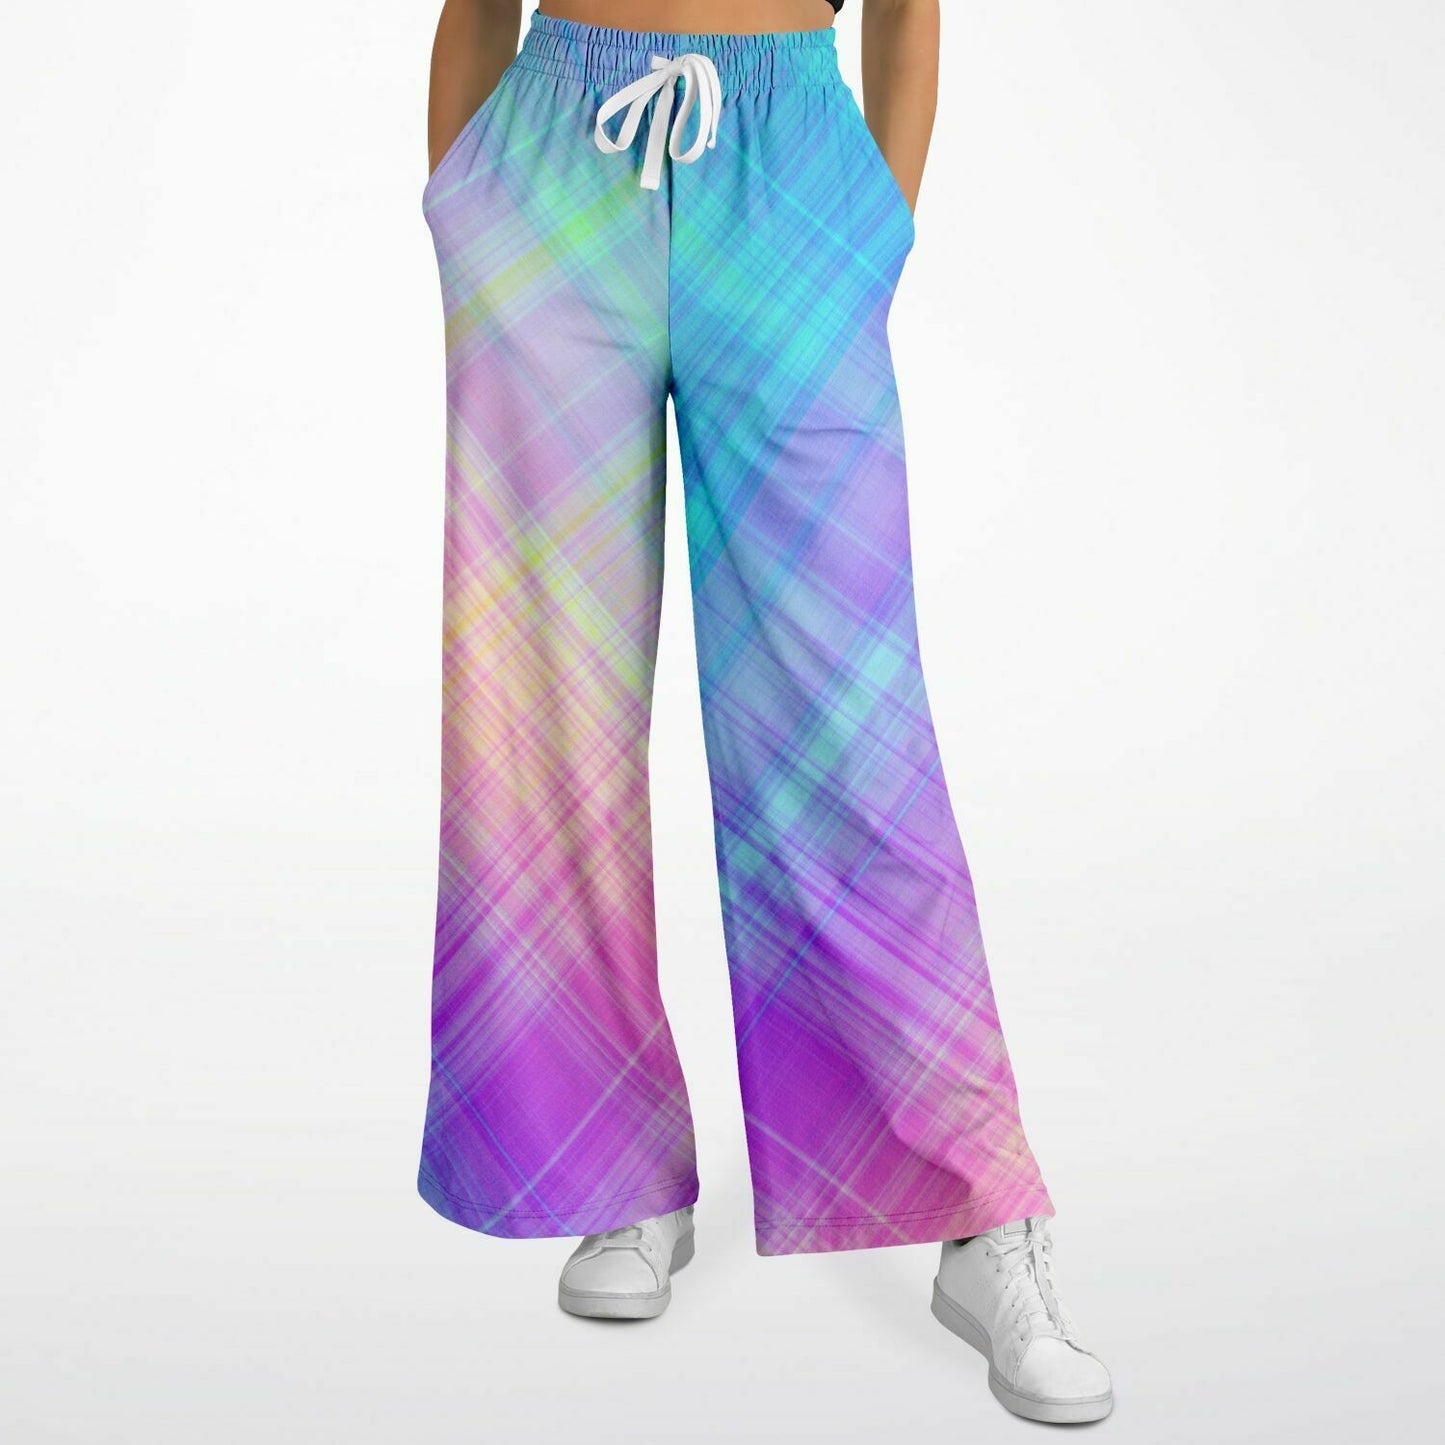 Multicoloured Flared Pants for Entertainers